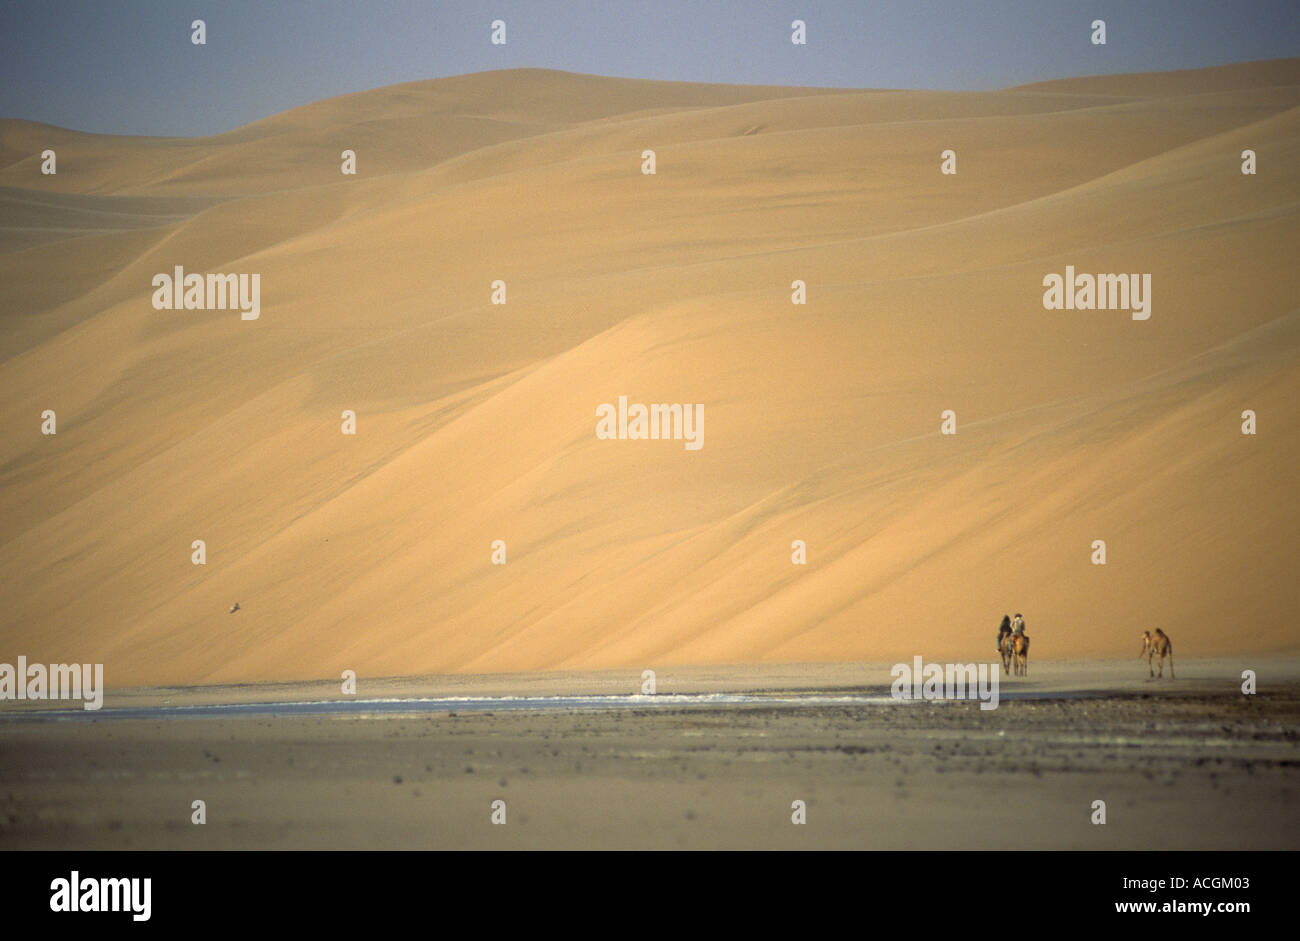 Benedict Allen and camels travel along the sand dunes of the Langevaan in the Namib Naukluft desert Stock Photo